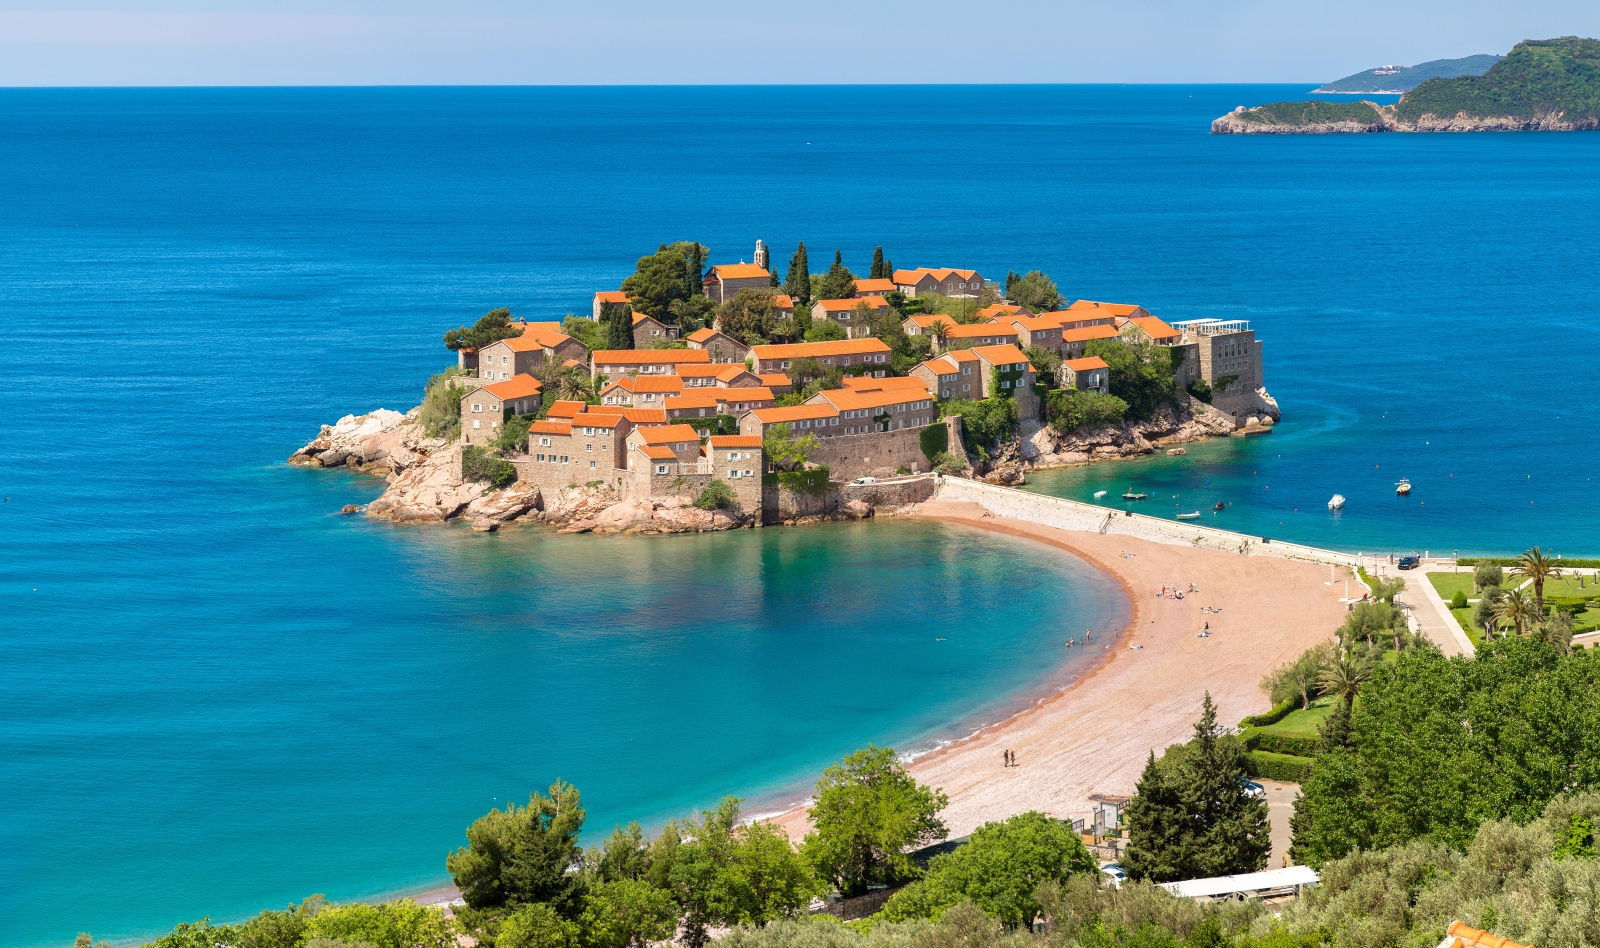 View of the peninsula Sveti Stefan and its surrounding turquoise waters